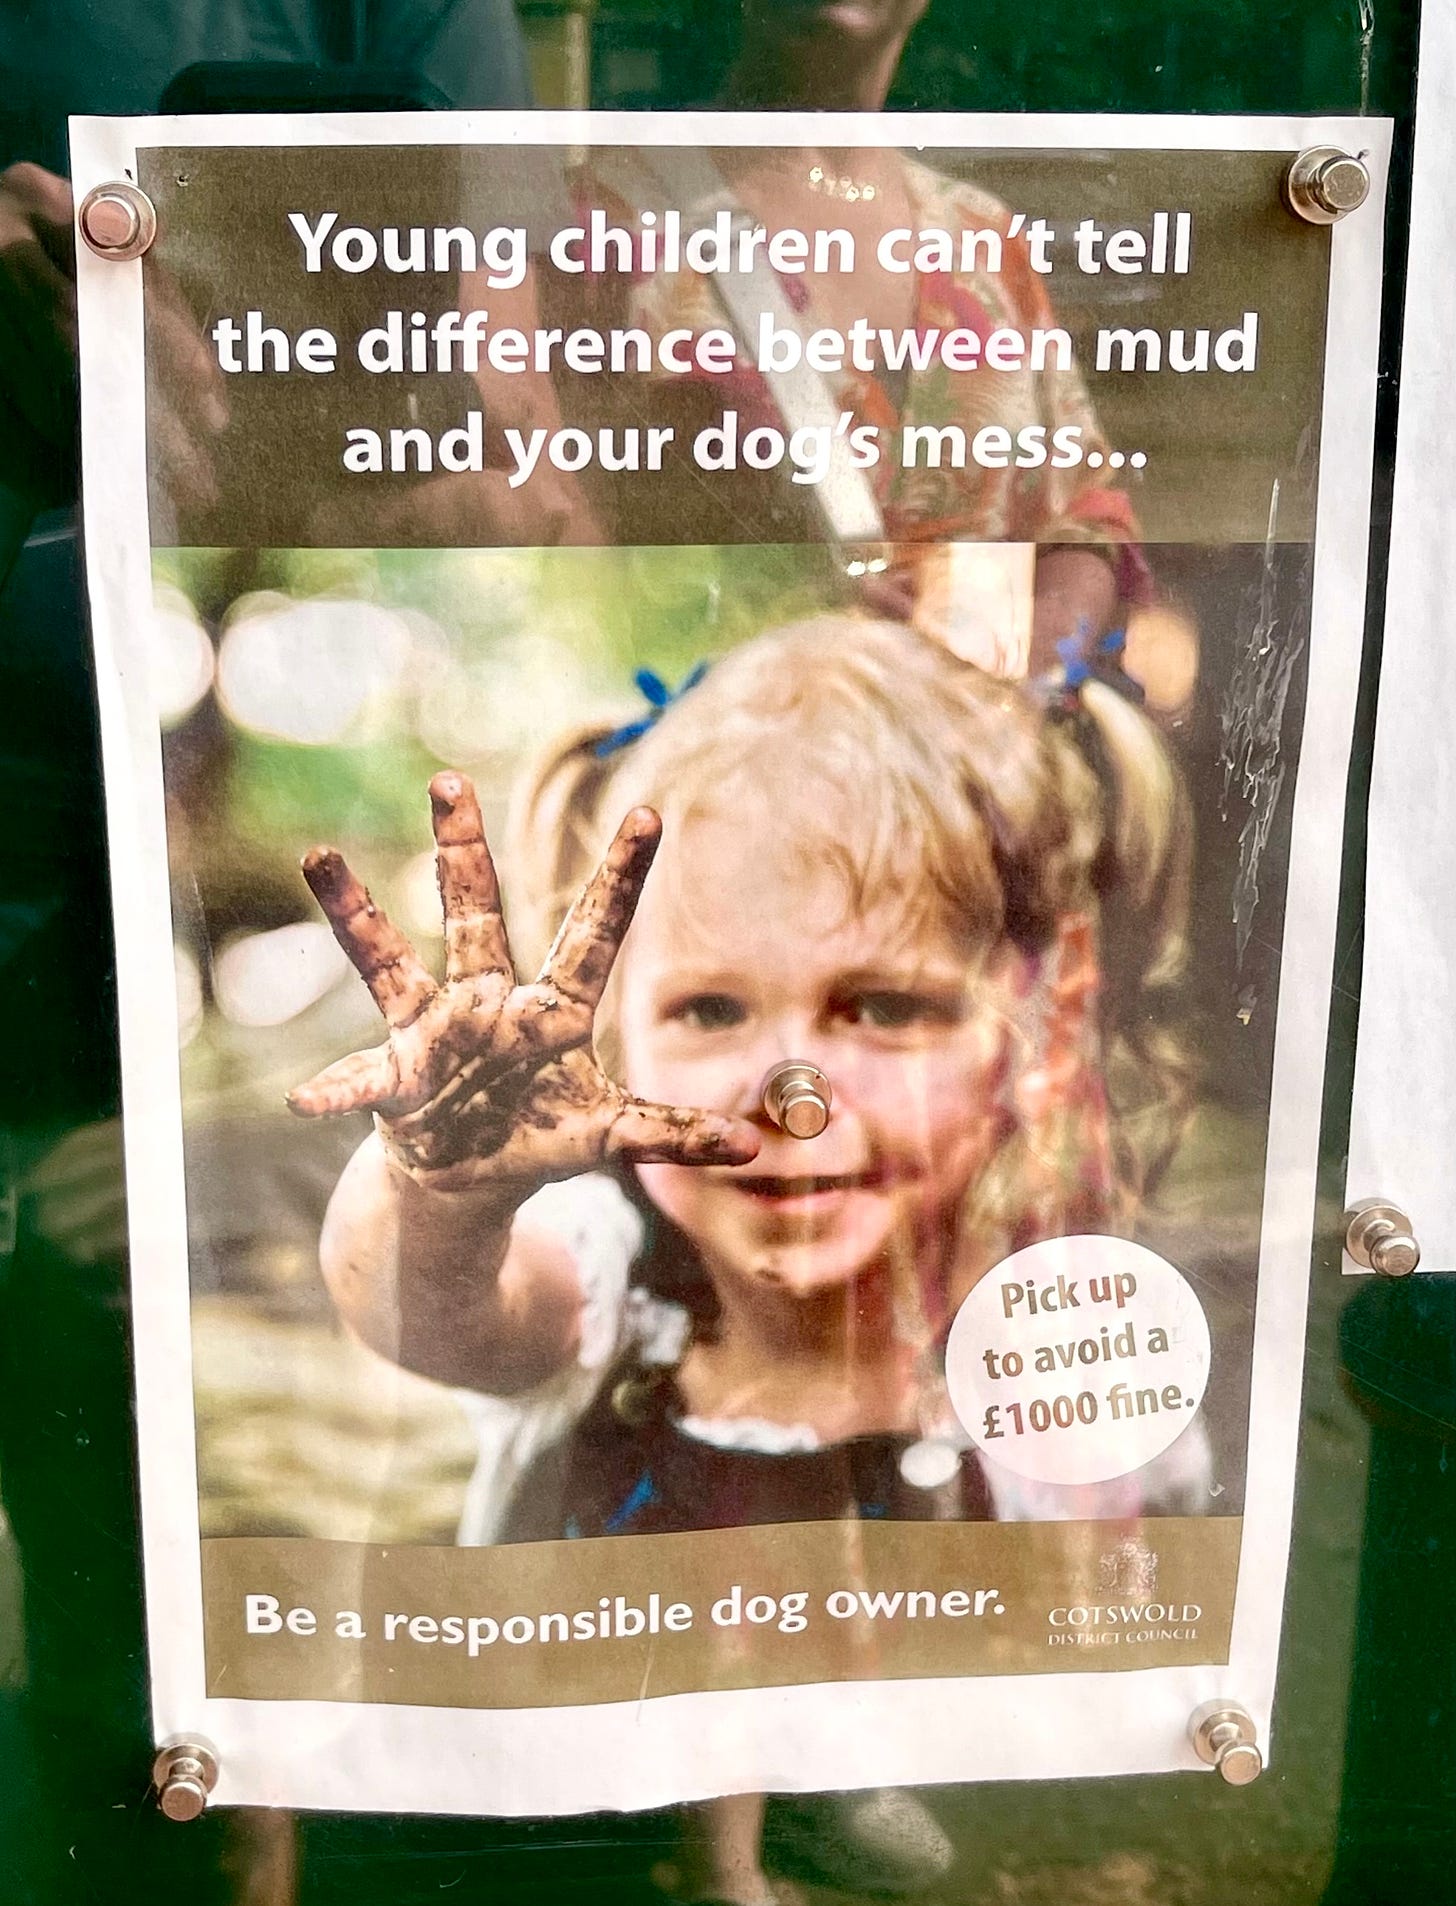 a posted flyer picturing a young girl with dirty hands reading, "Young children can't tell the difference between mud and your dog's mess. Be a responsible dog owner."